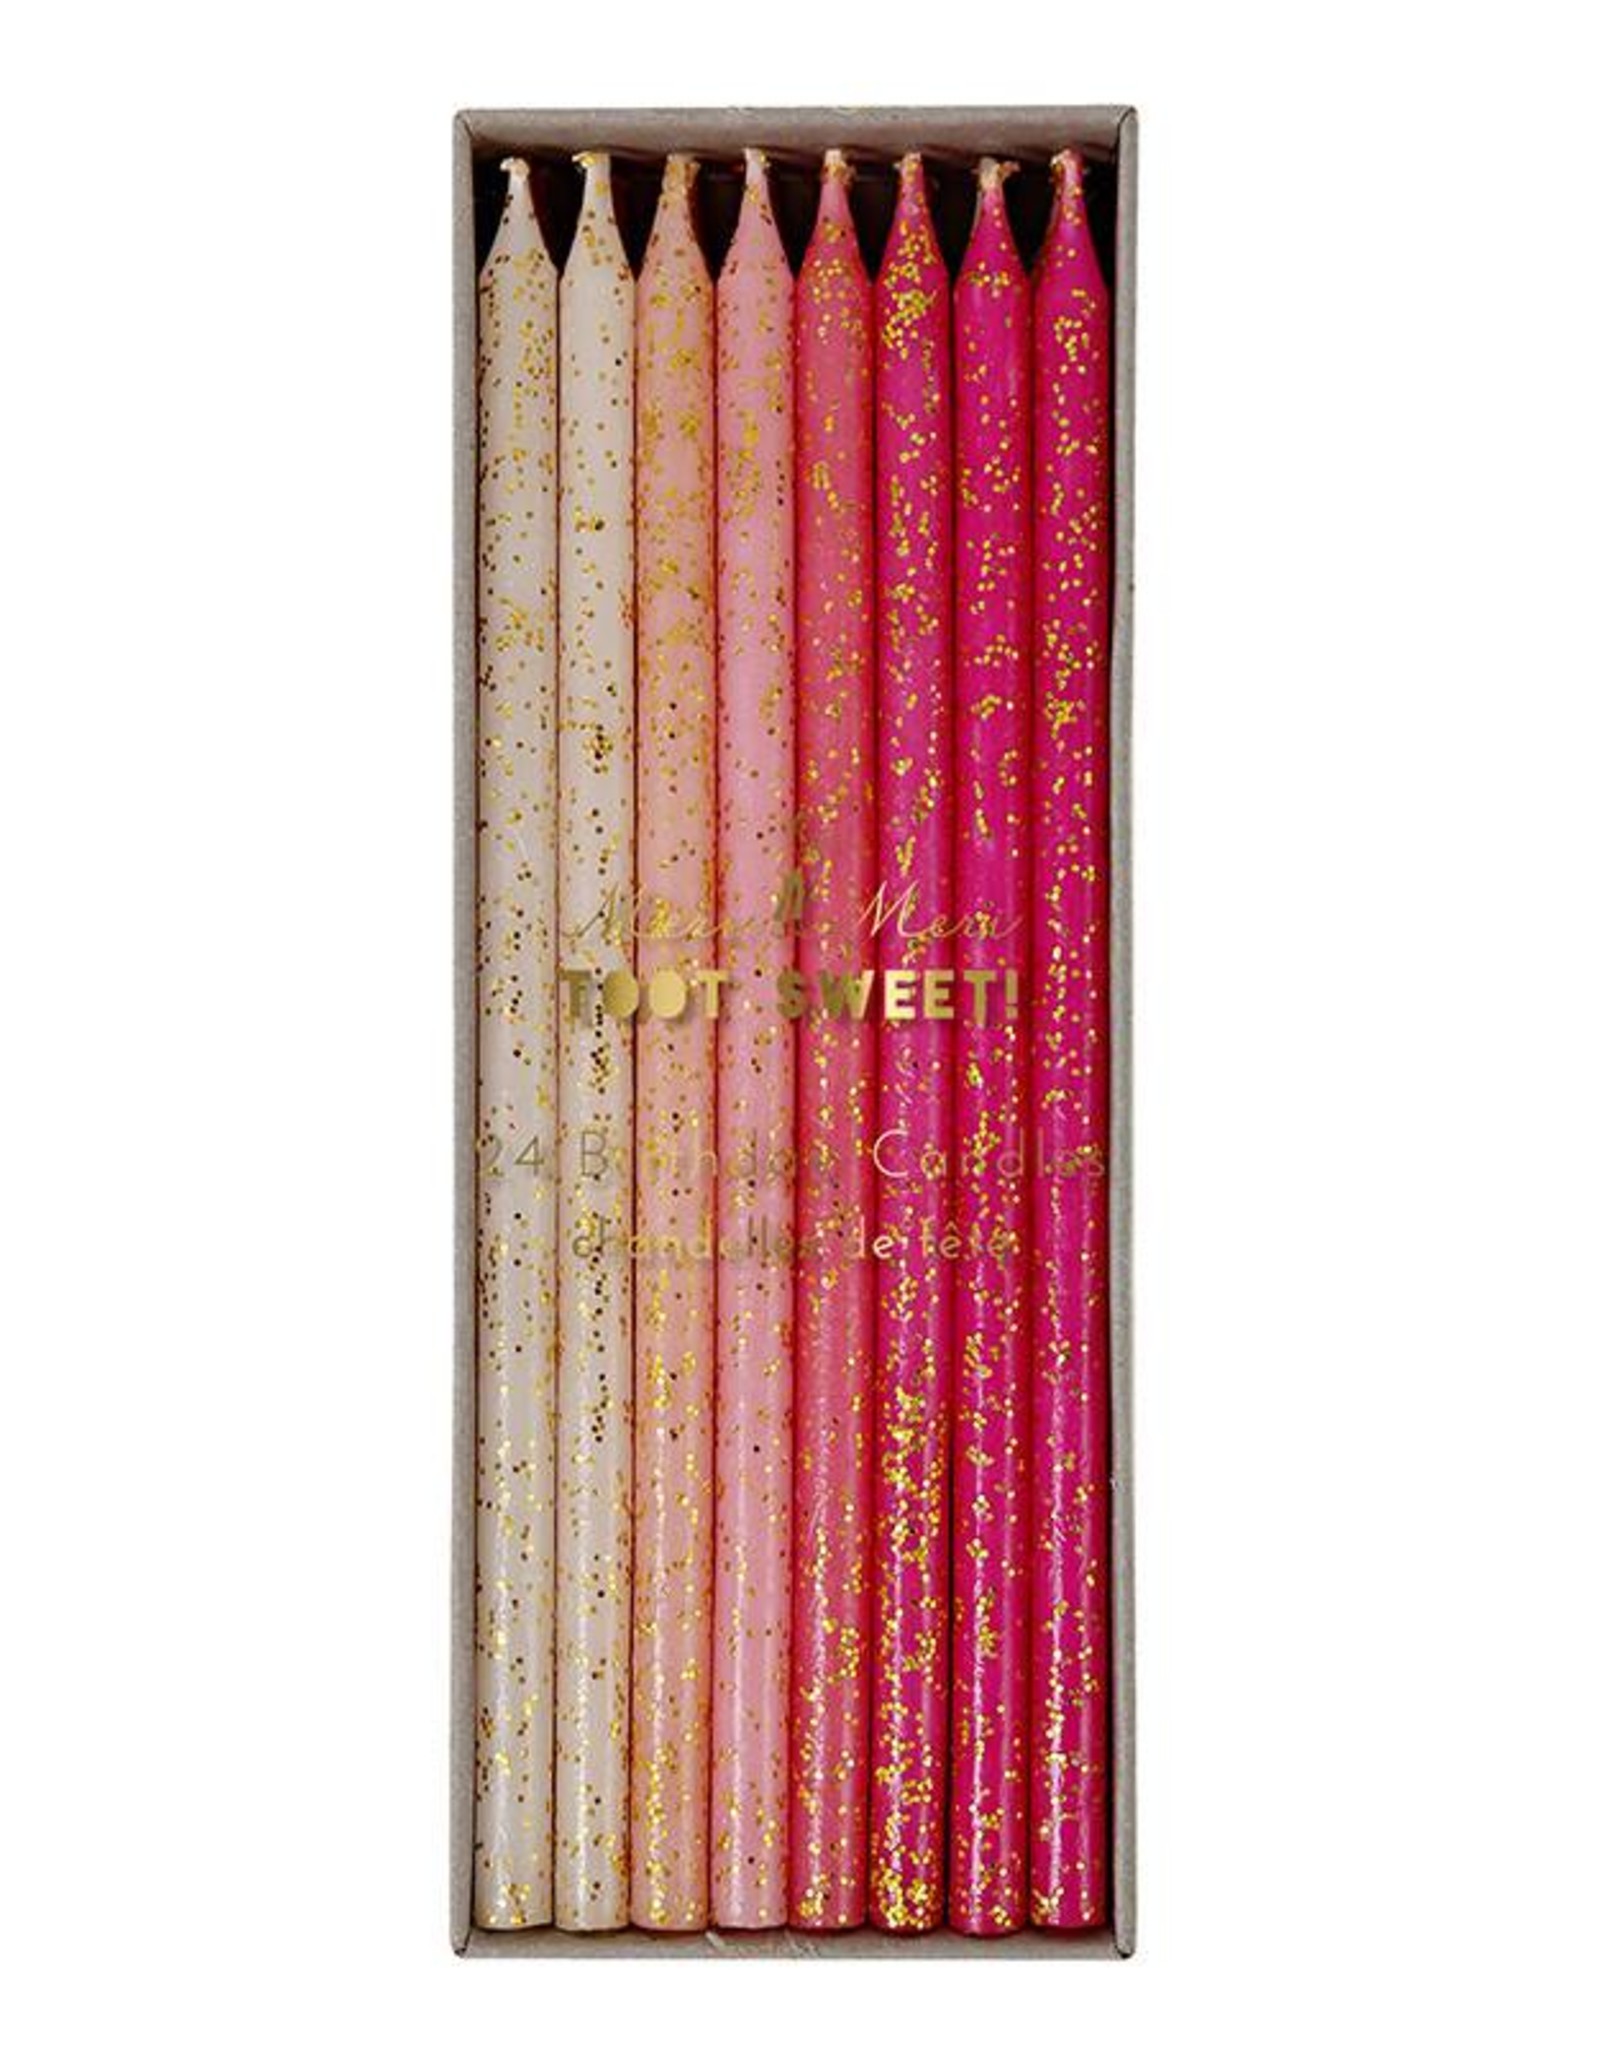 PINK BIRTHDAY CANDLE SET of 24